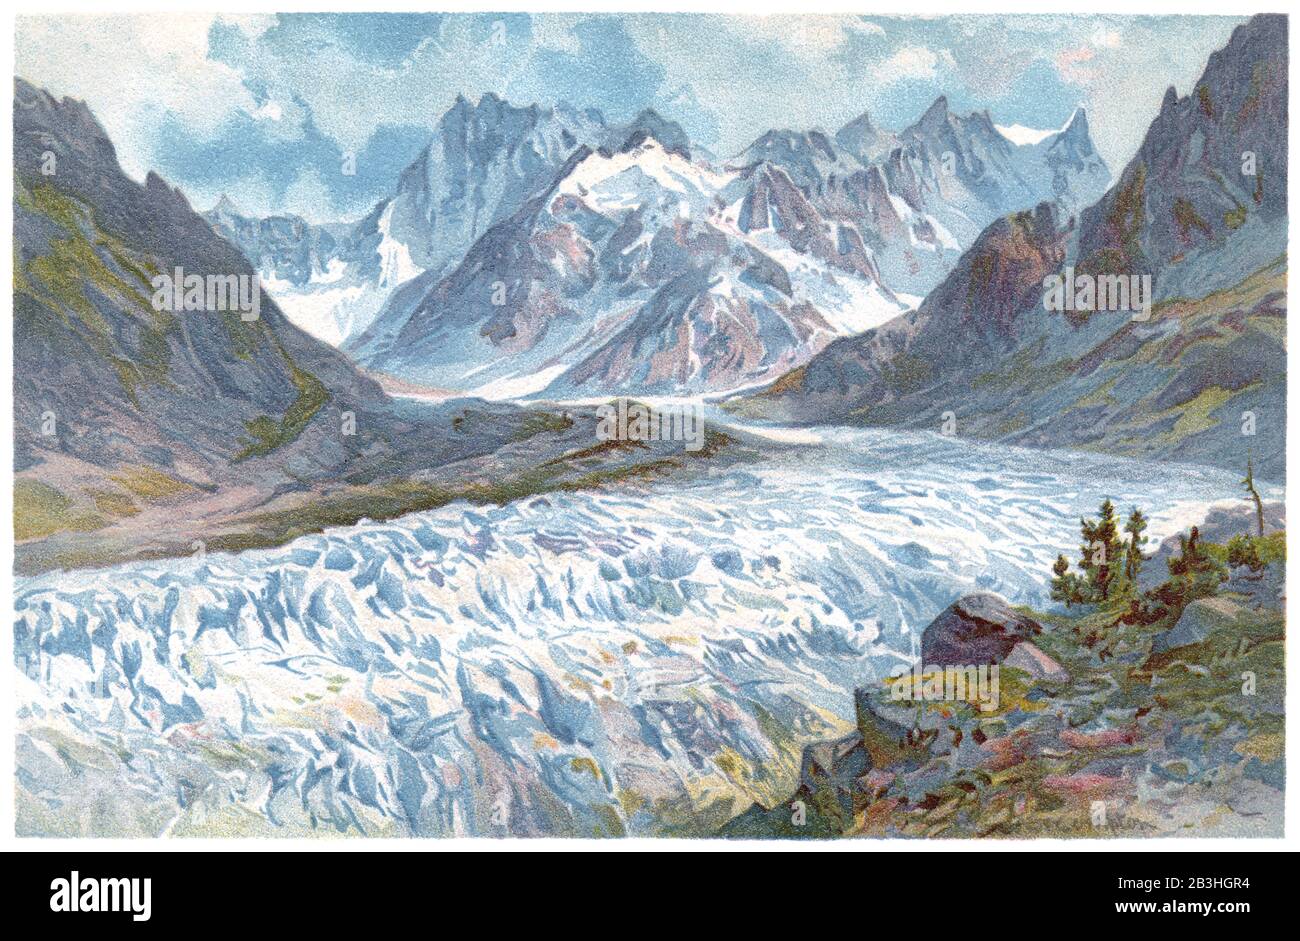 1893 chromolithographic illustration of the Mer De Glace (Sea Of Ice) glacier in the French Alps. The Grandes Jorasses mountain is in the background. Stock Photo